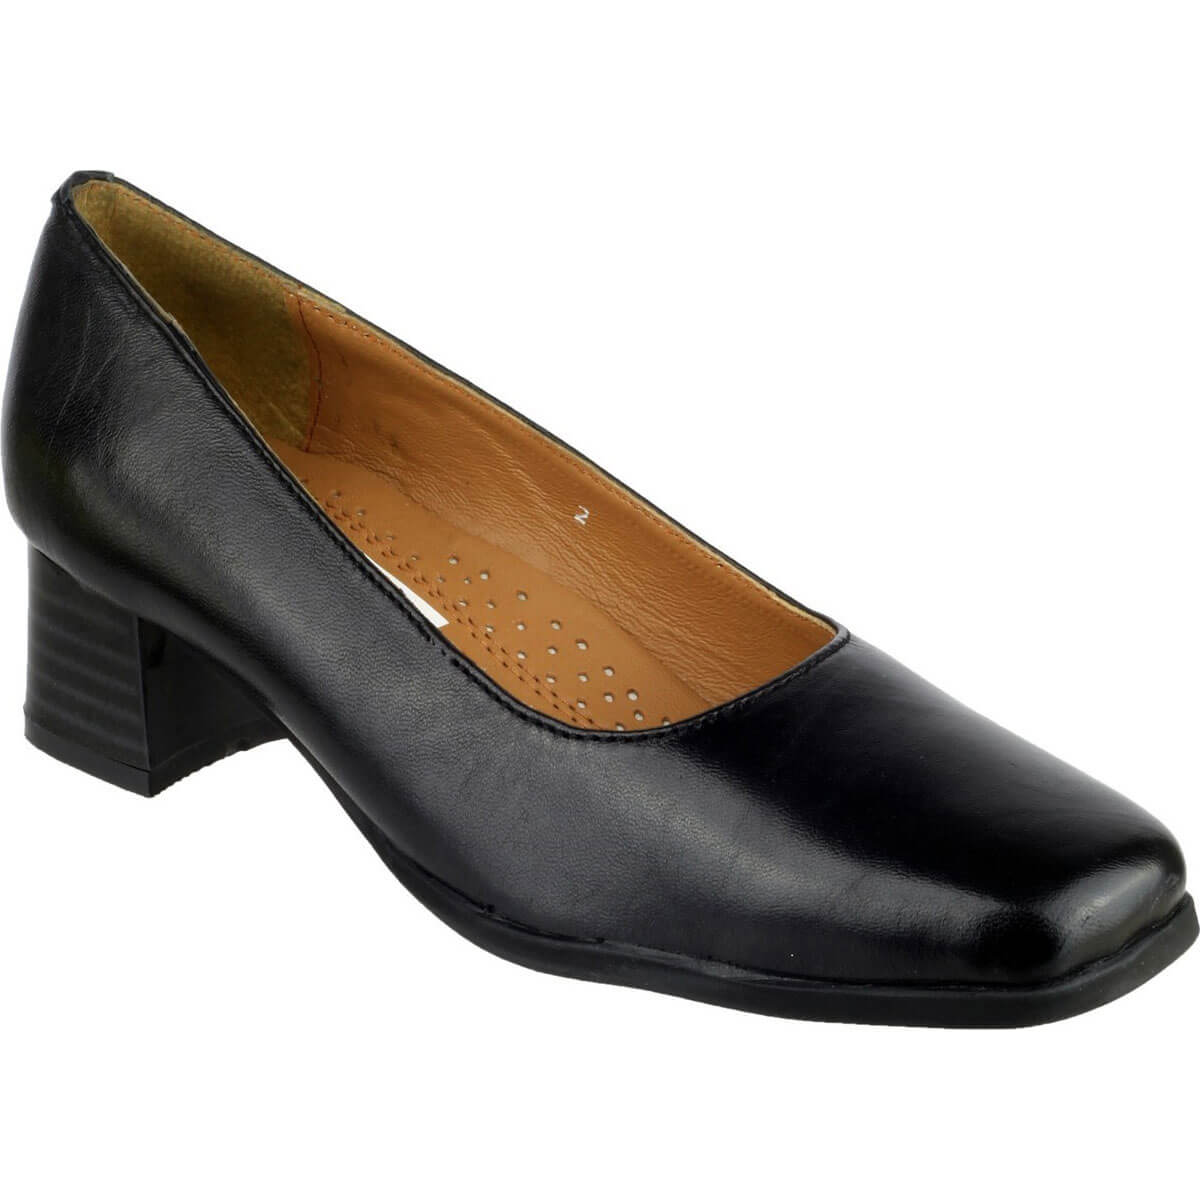 Image of Amblers Walford Ladies Shoes Leather Court Black Size 9